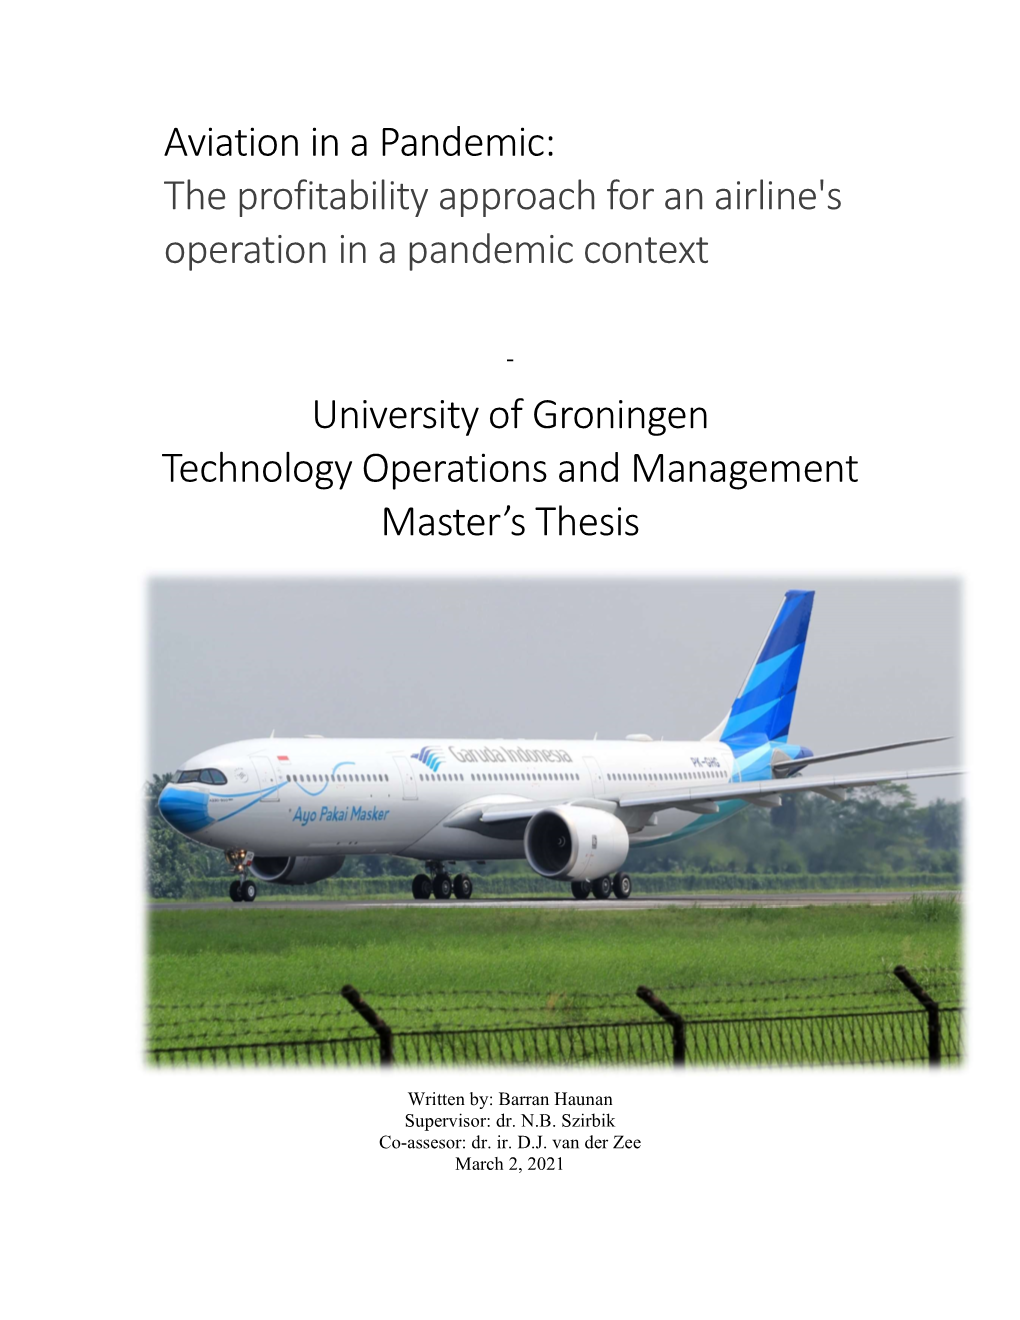 University of Groningen Technology Operations and Management Master's Thesis Aviation in a Pandemic: the Profitability Approac